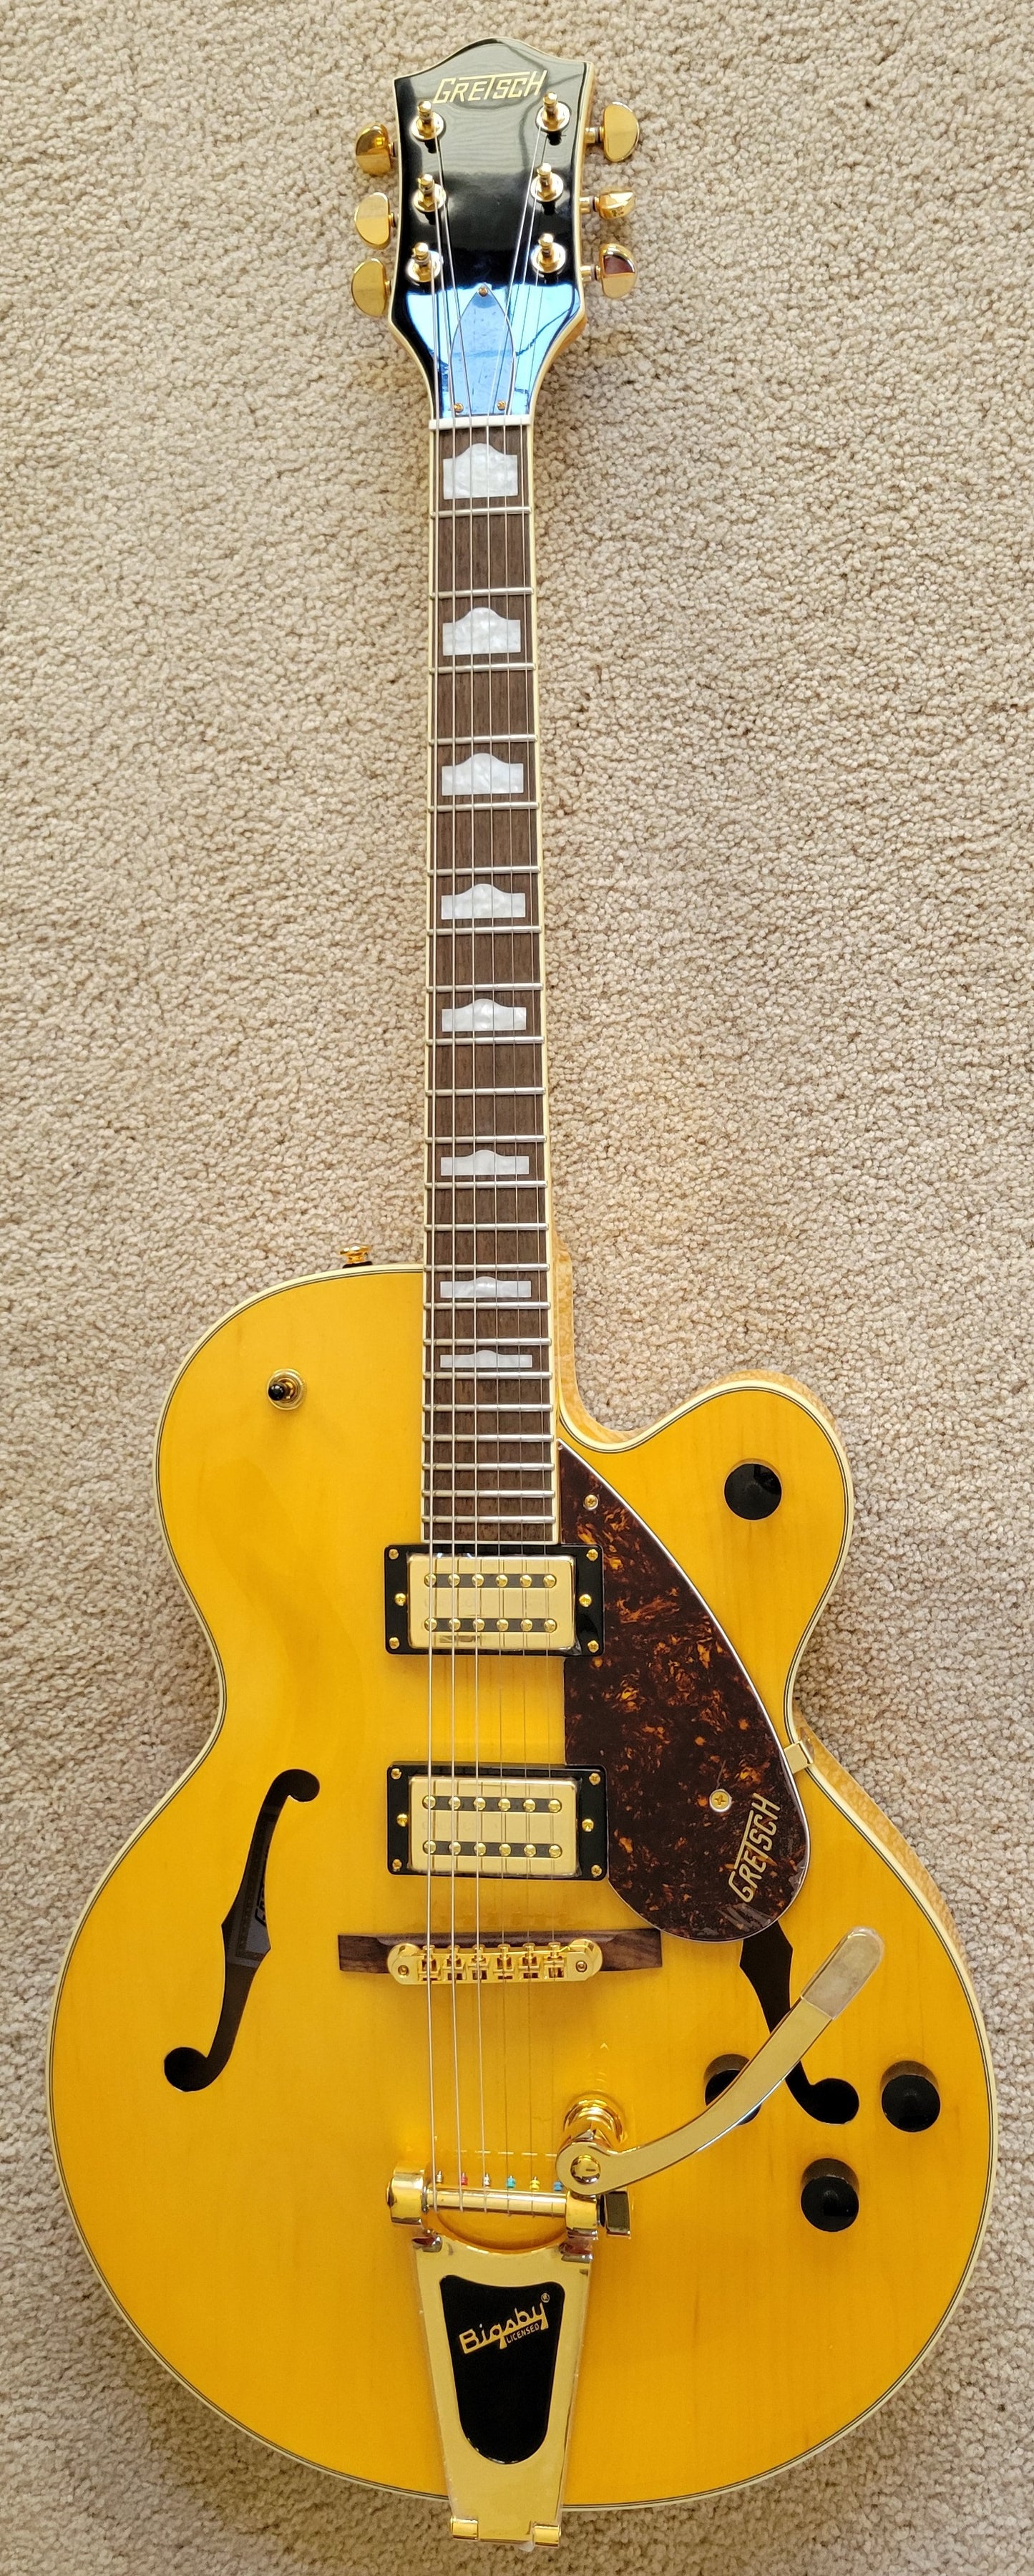 Gretsch G2410TG Streamliner, Hollow Body Single-Cut With Bigsby Guitar, New Hard Shell Case